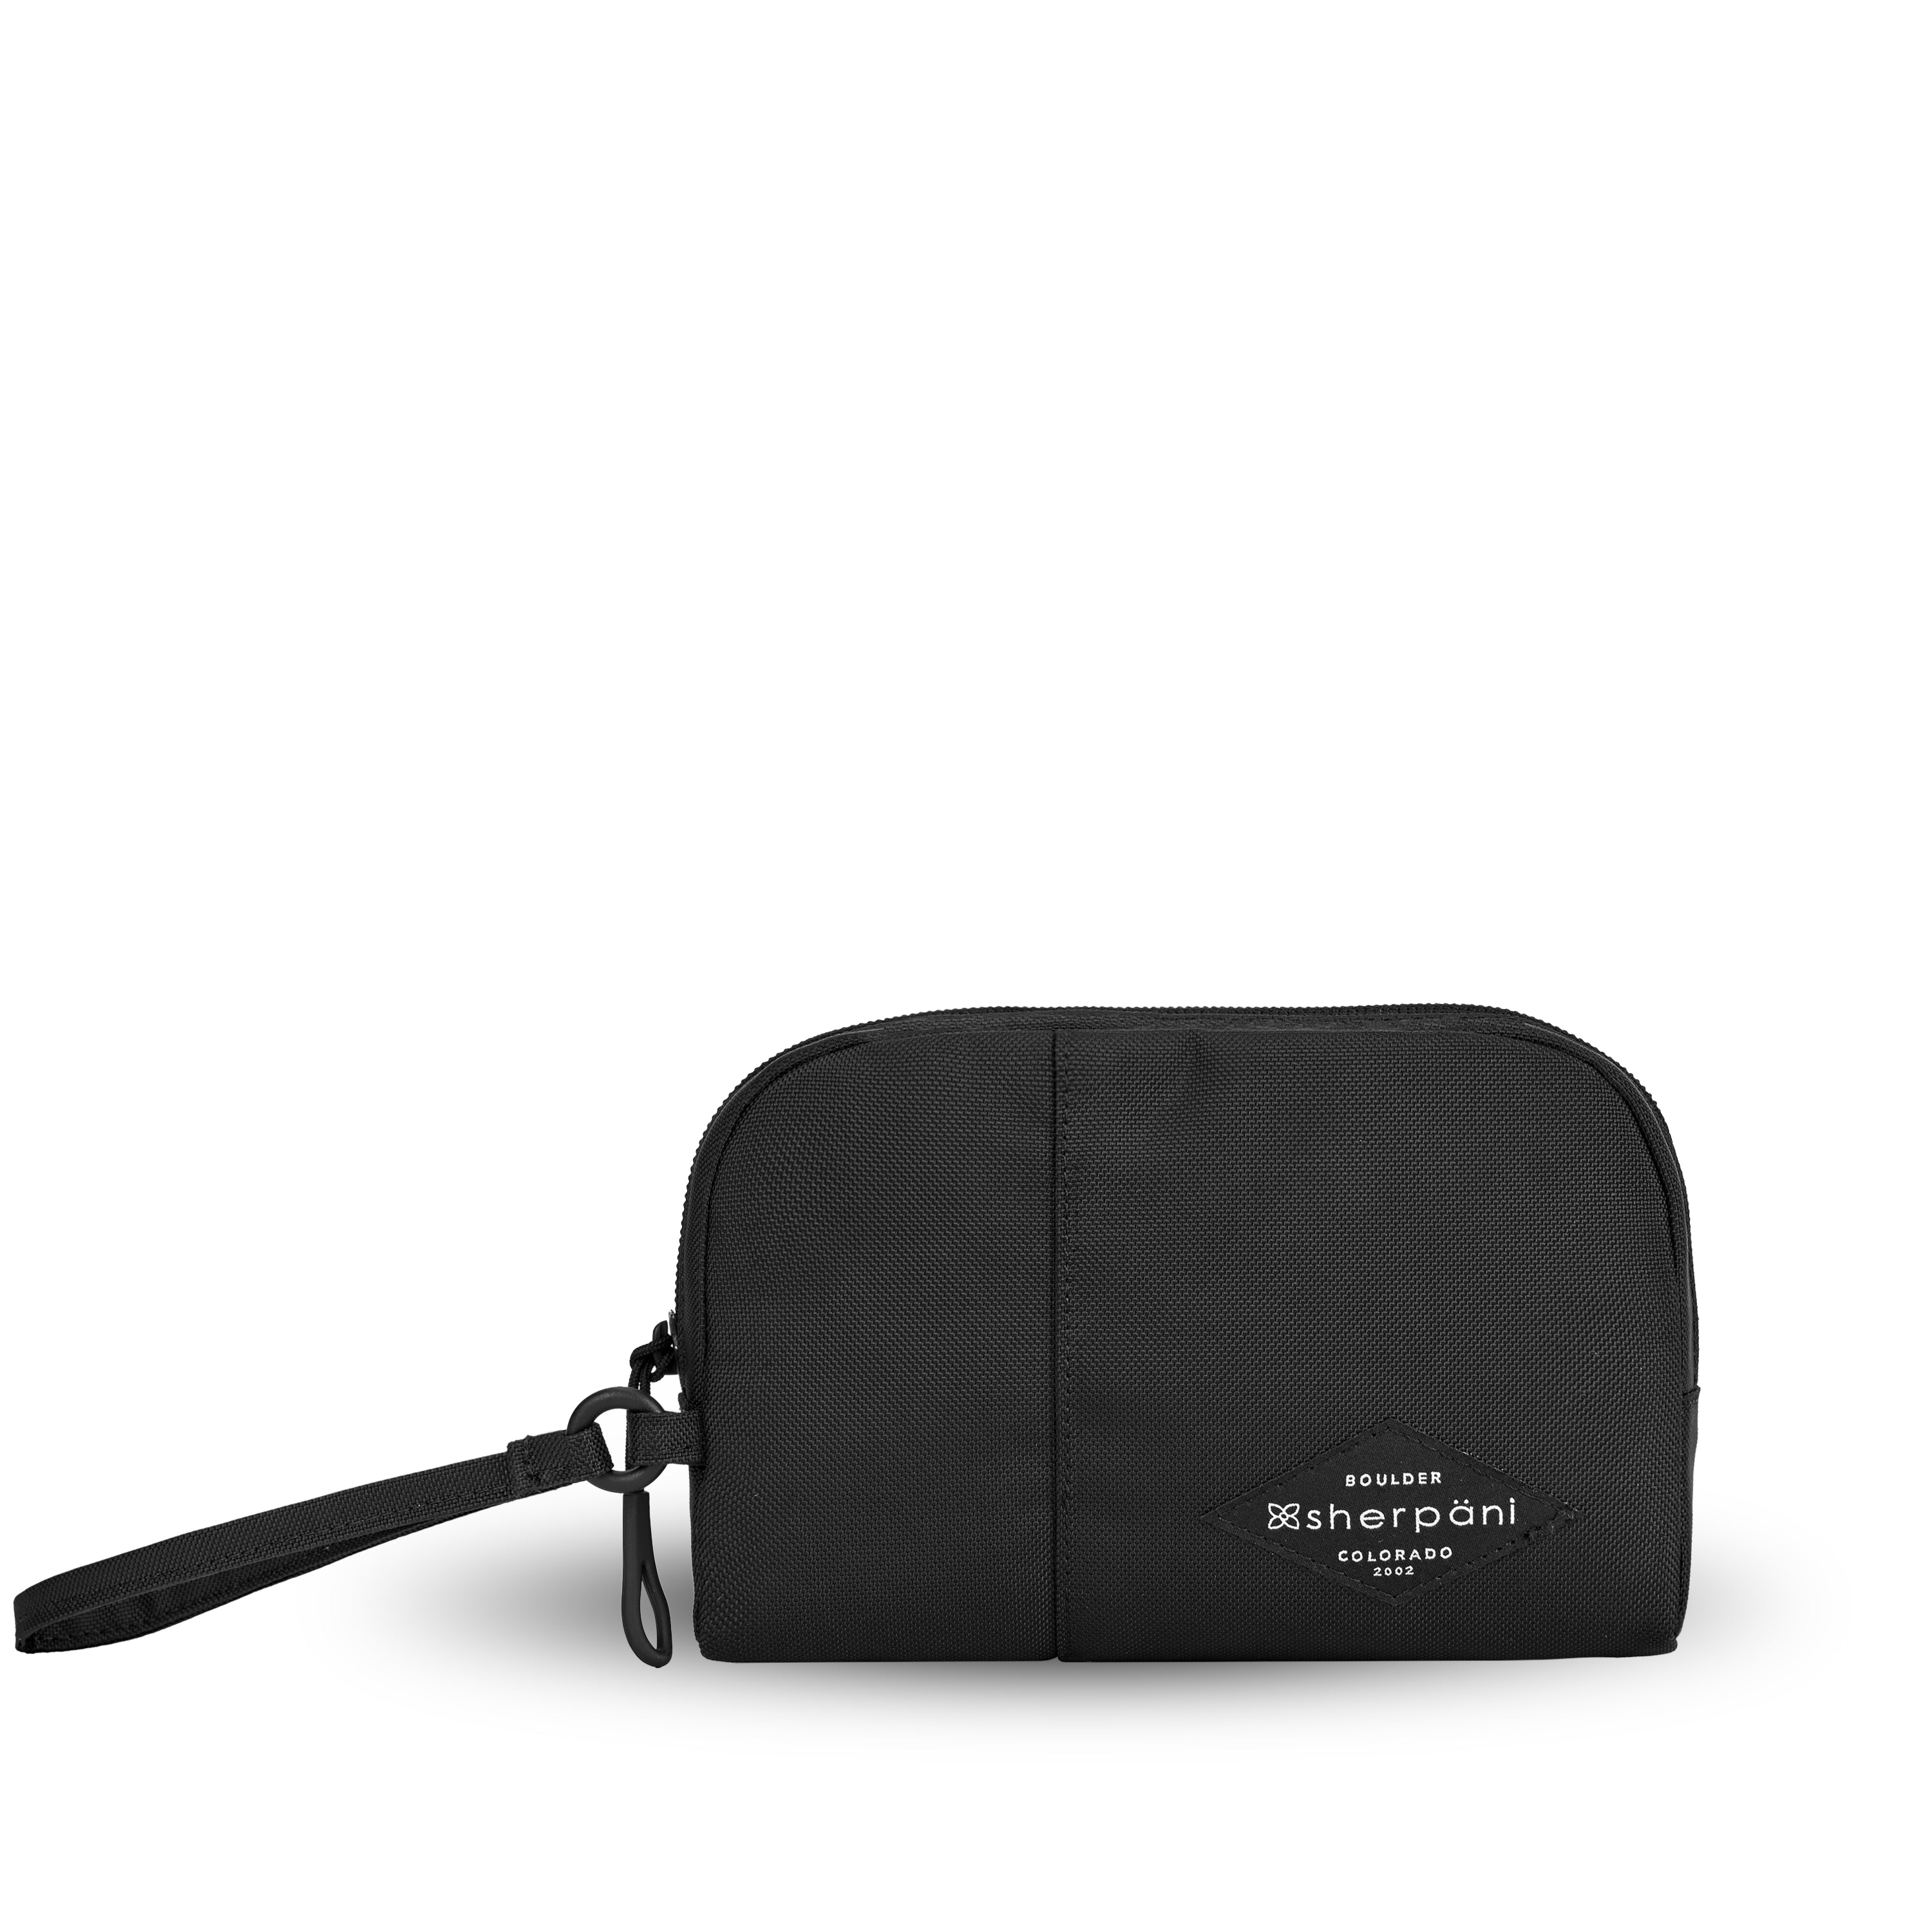 Flat front view of Sherpani travel accessory, the Jolie in Raven, in medium size. The pouch is entirely black. It features a black wristlet strap and an easy-pull zipper accented in black. 